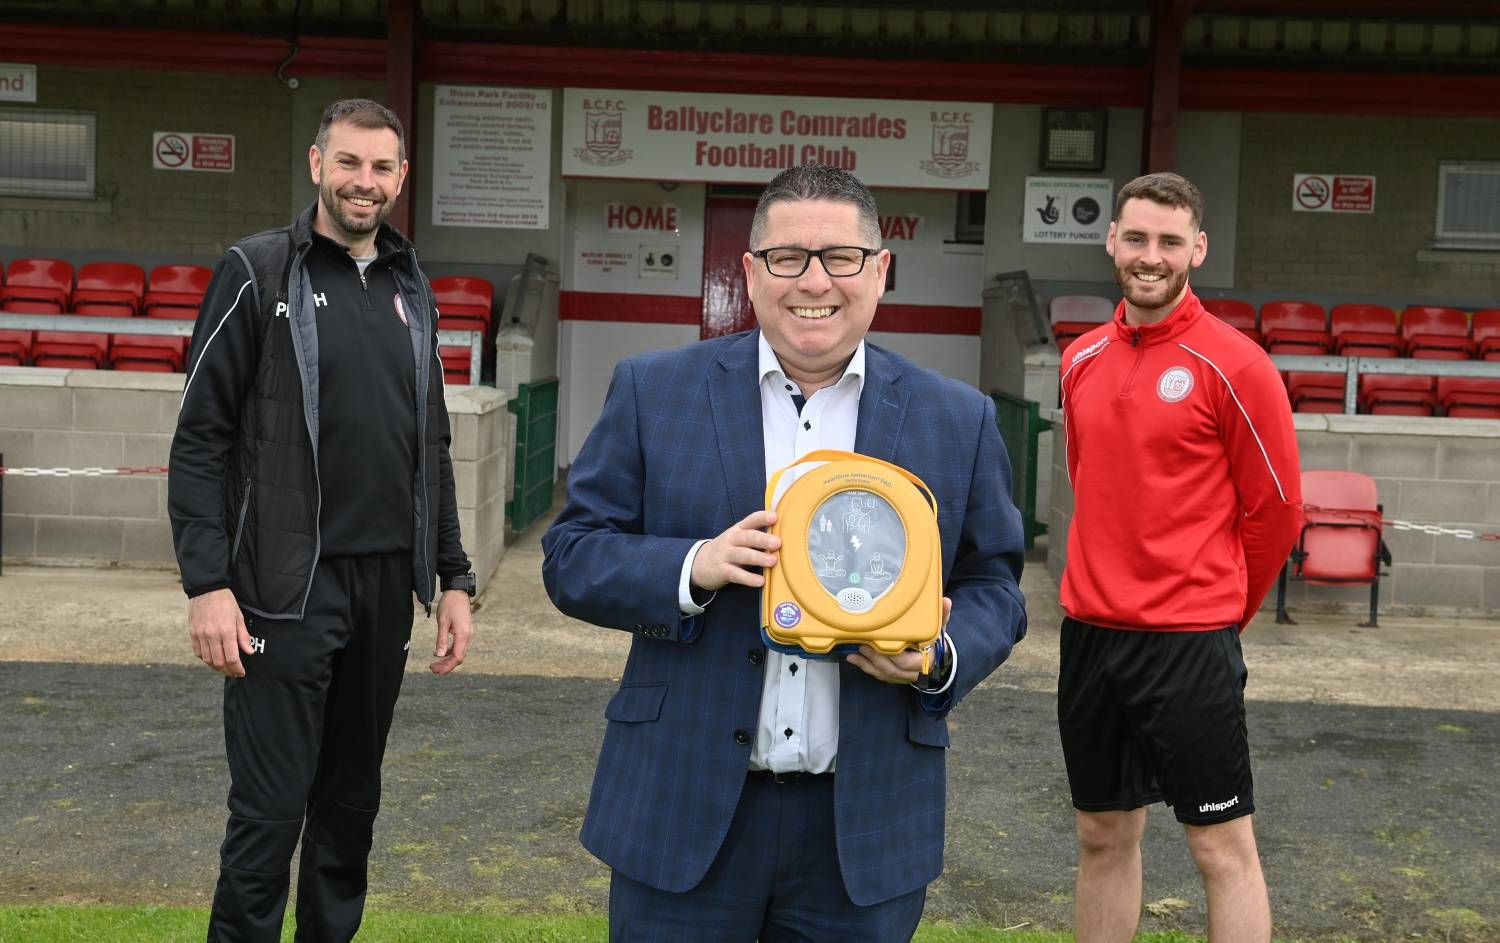 NIFL Chairman Gerard Lawlor presents a defibrillator to Ballyclare Comrades manager Paul Harbinson and player Kyle Crawford